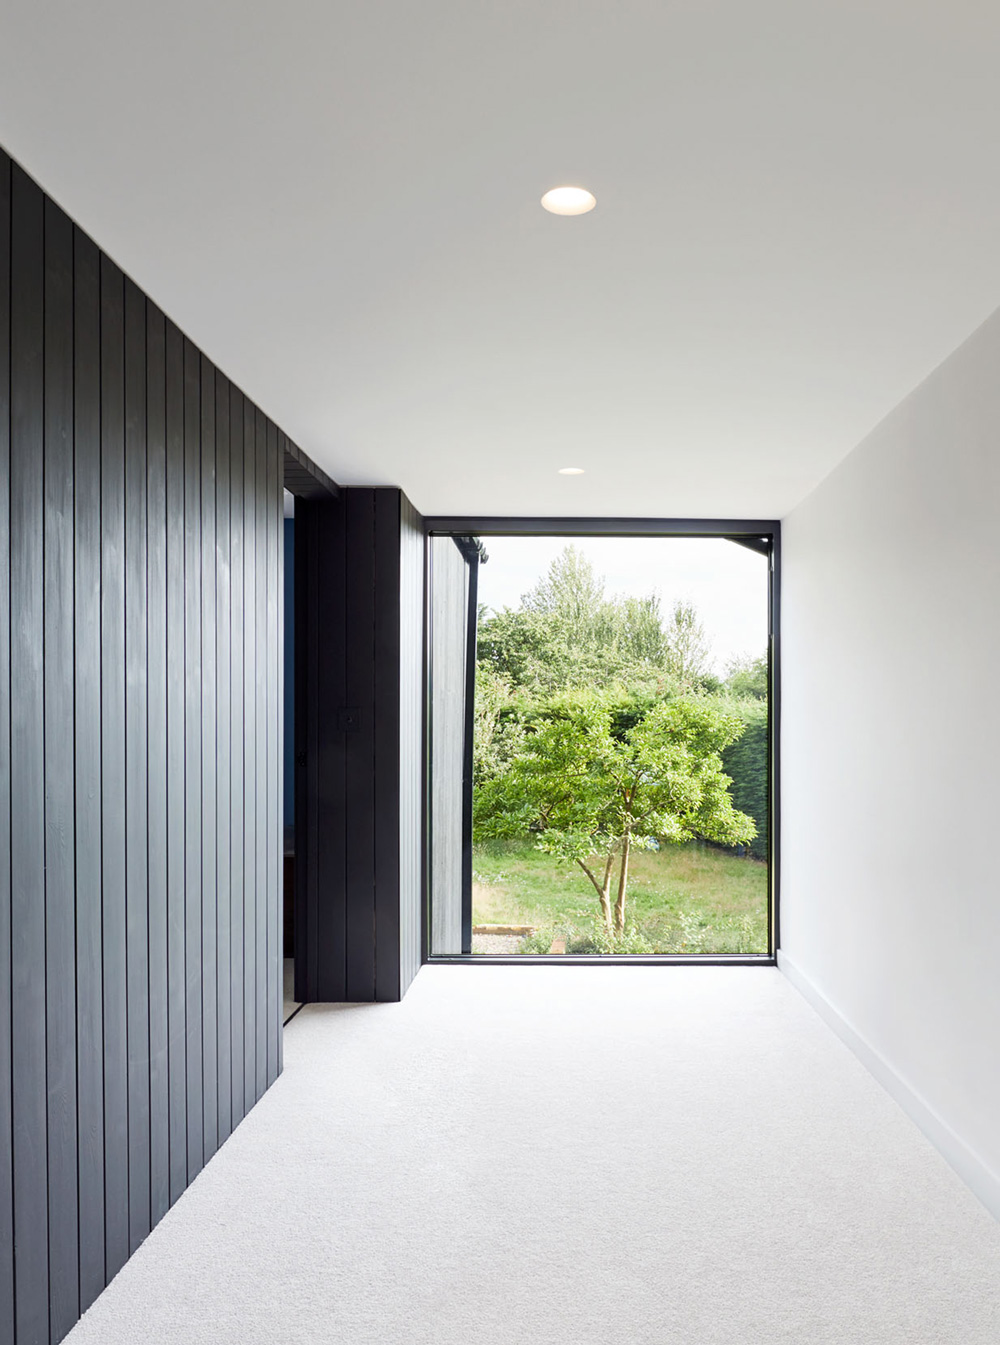 View along the first floor corridor with internal black timber cladding at Samarkand.